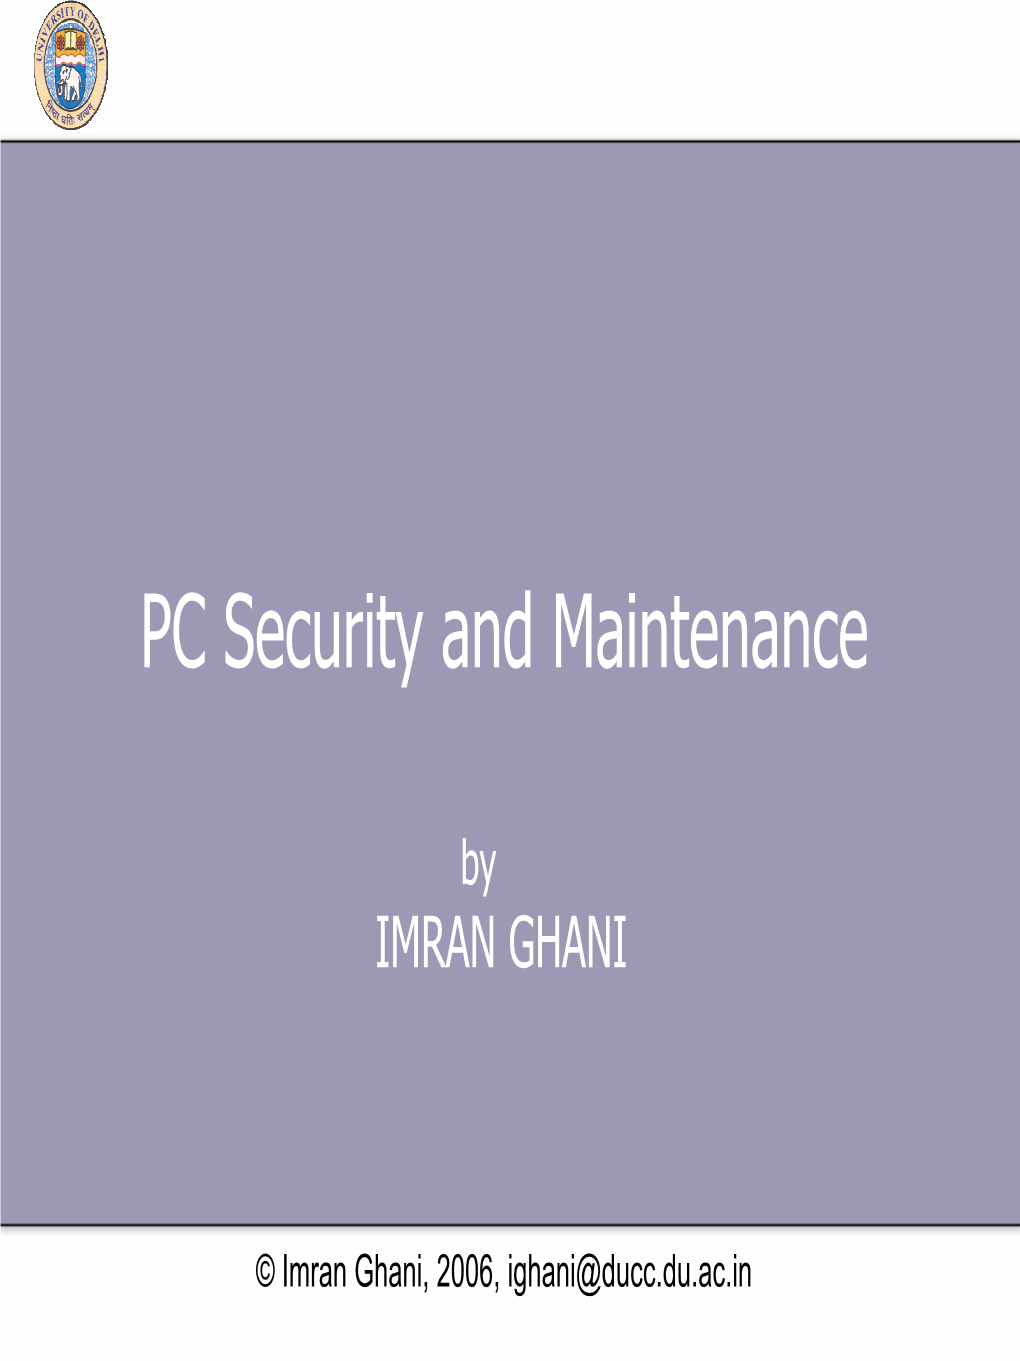 PC Maintenance and Security-Forecast